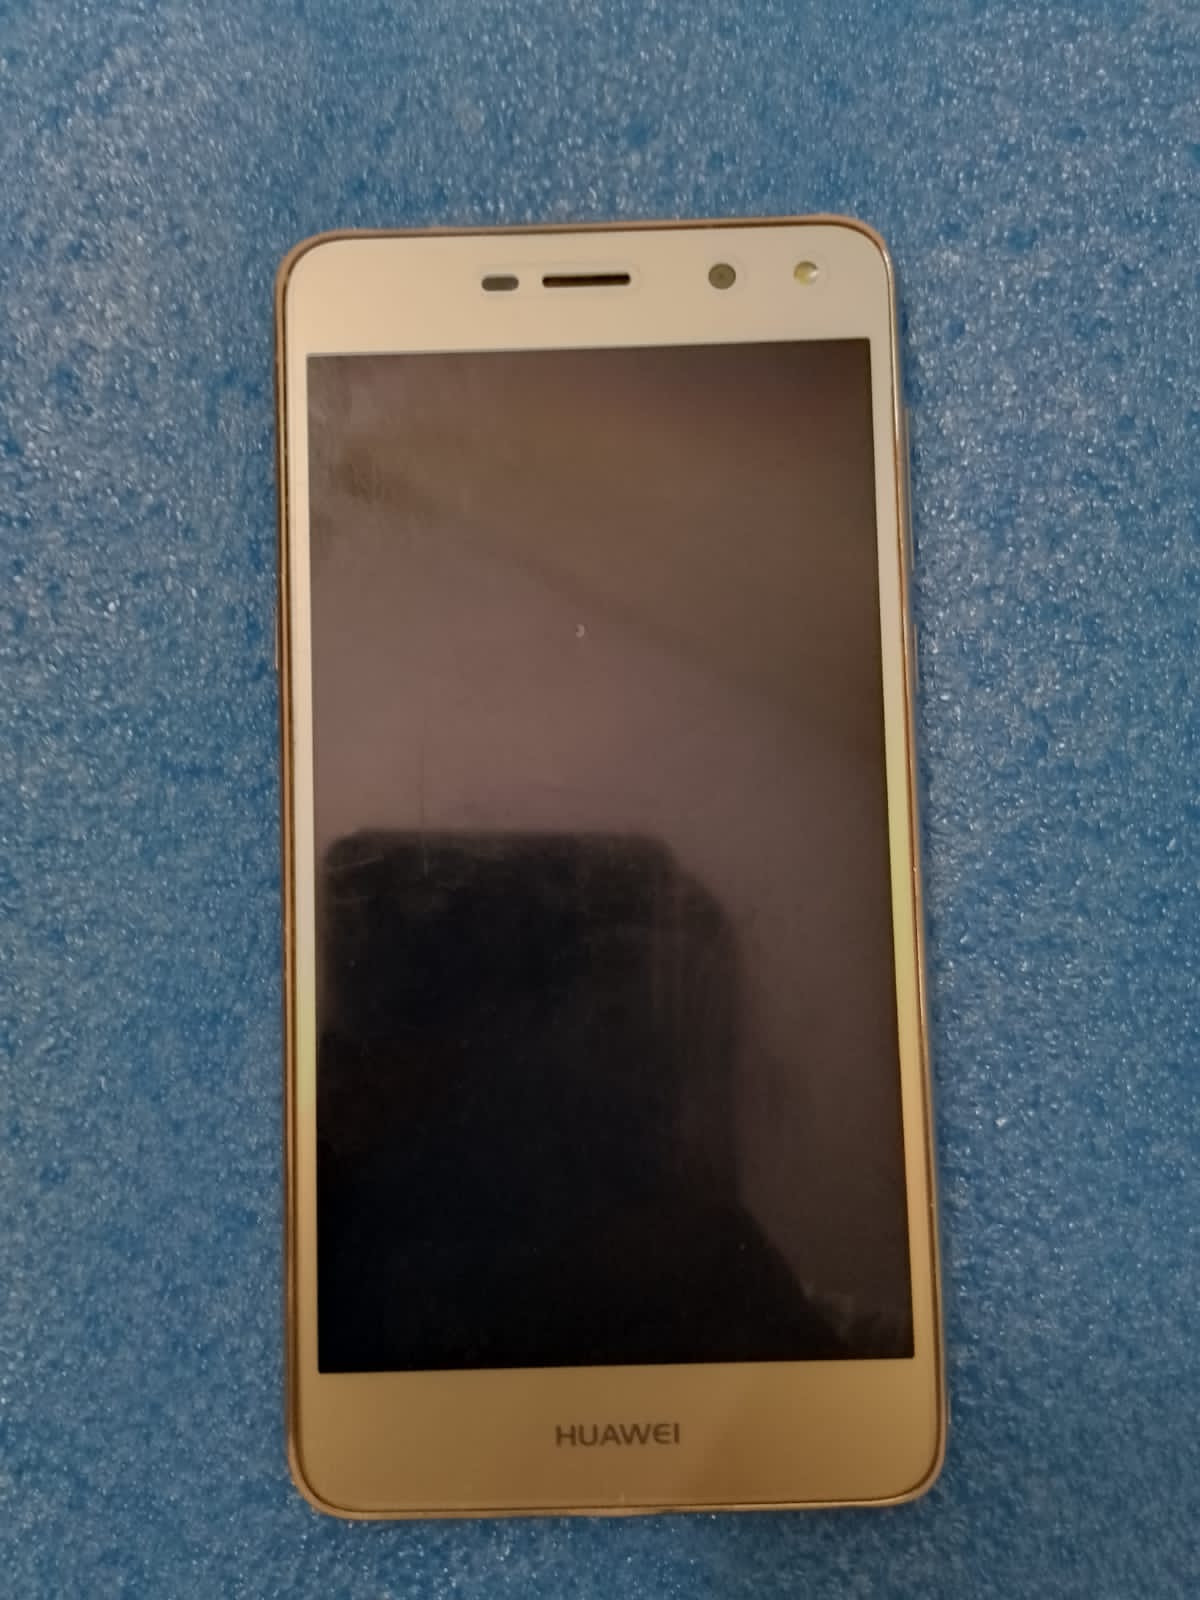 Huawei Y5 (2017) For Sale